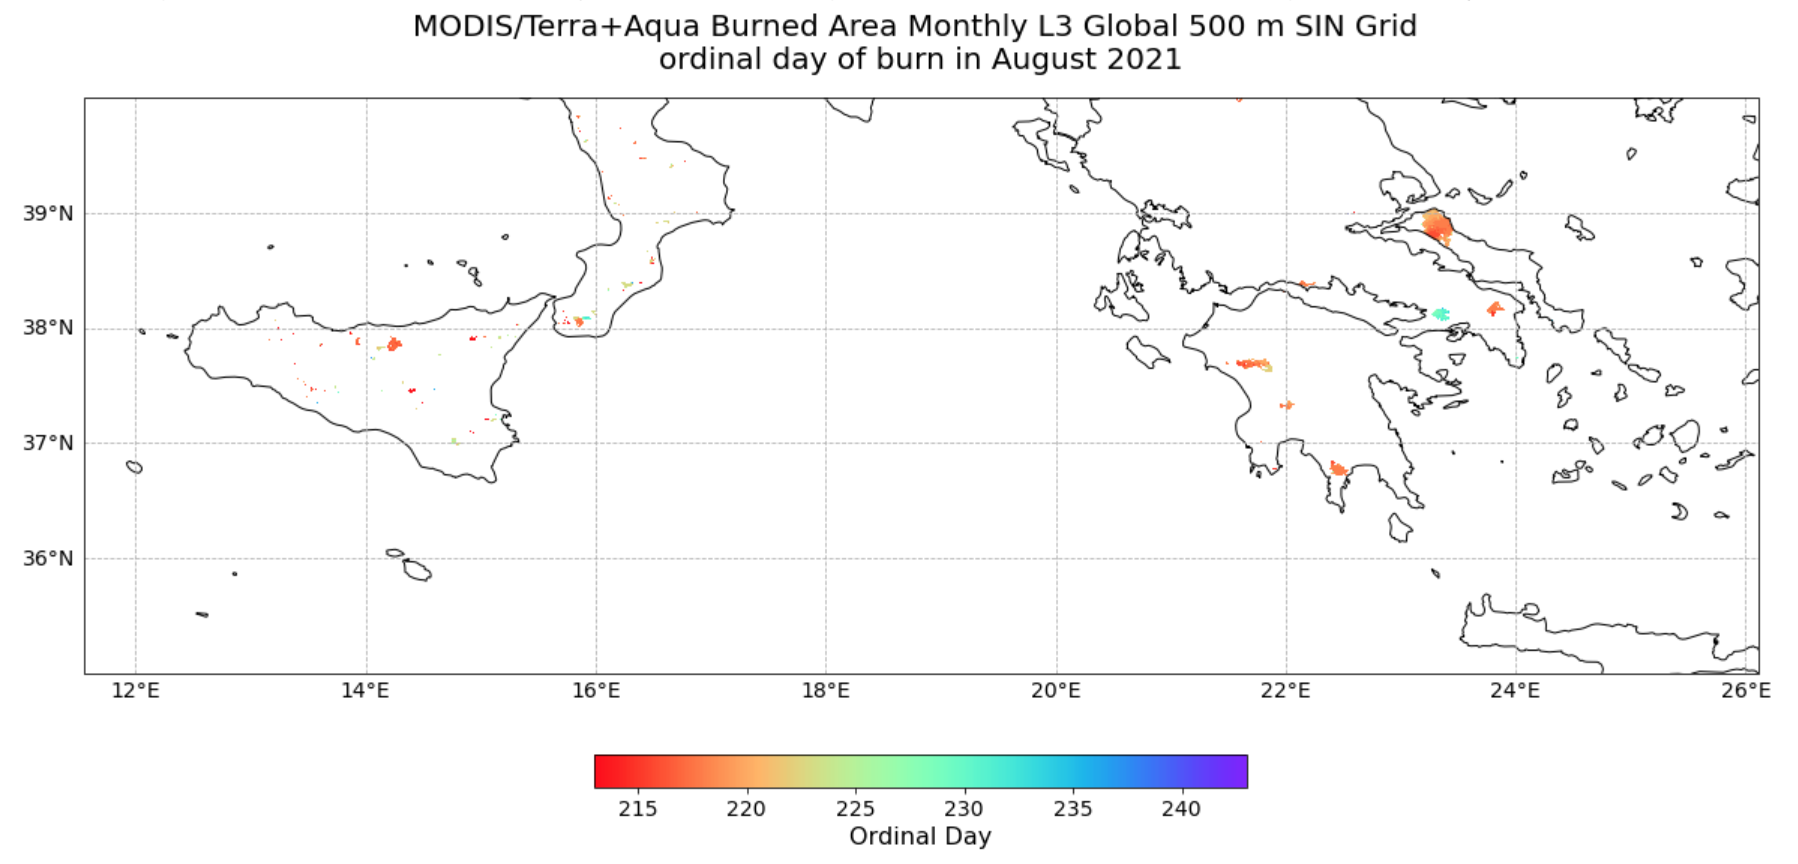 Figure 1. Burned areas in Greece and Italy coloured by the ordinal day of burn in August 2021, from MODIS Burned Area Monthly Level 3 product.